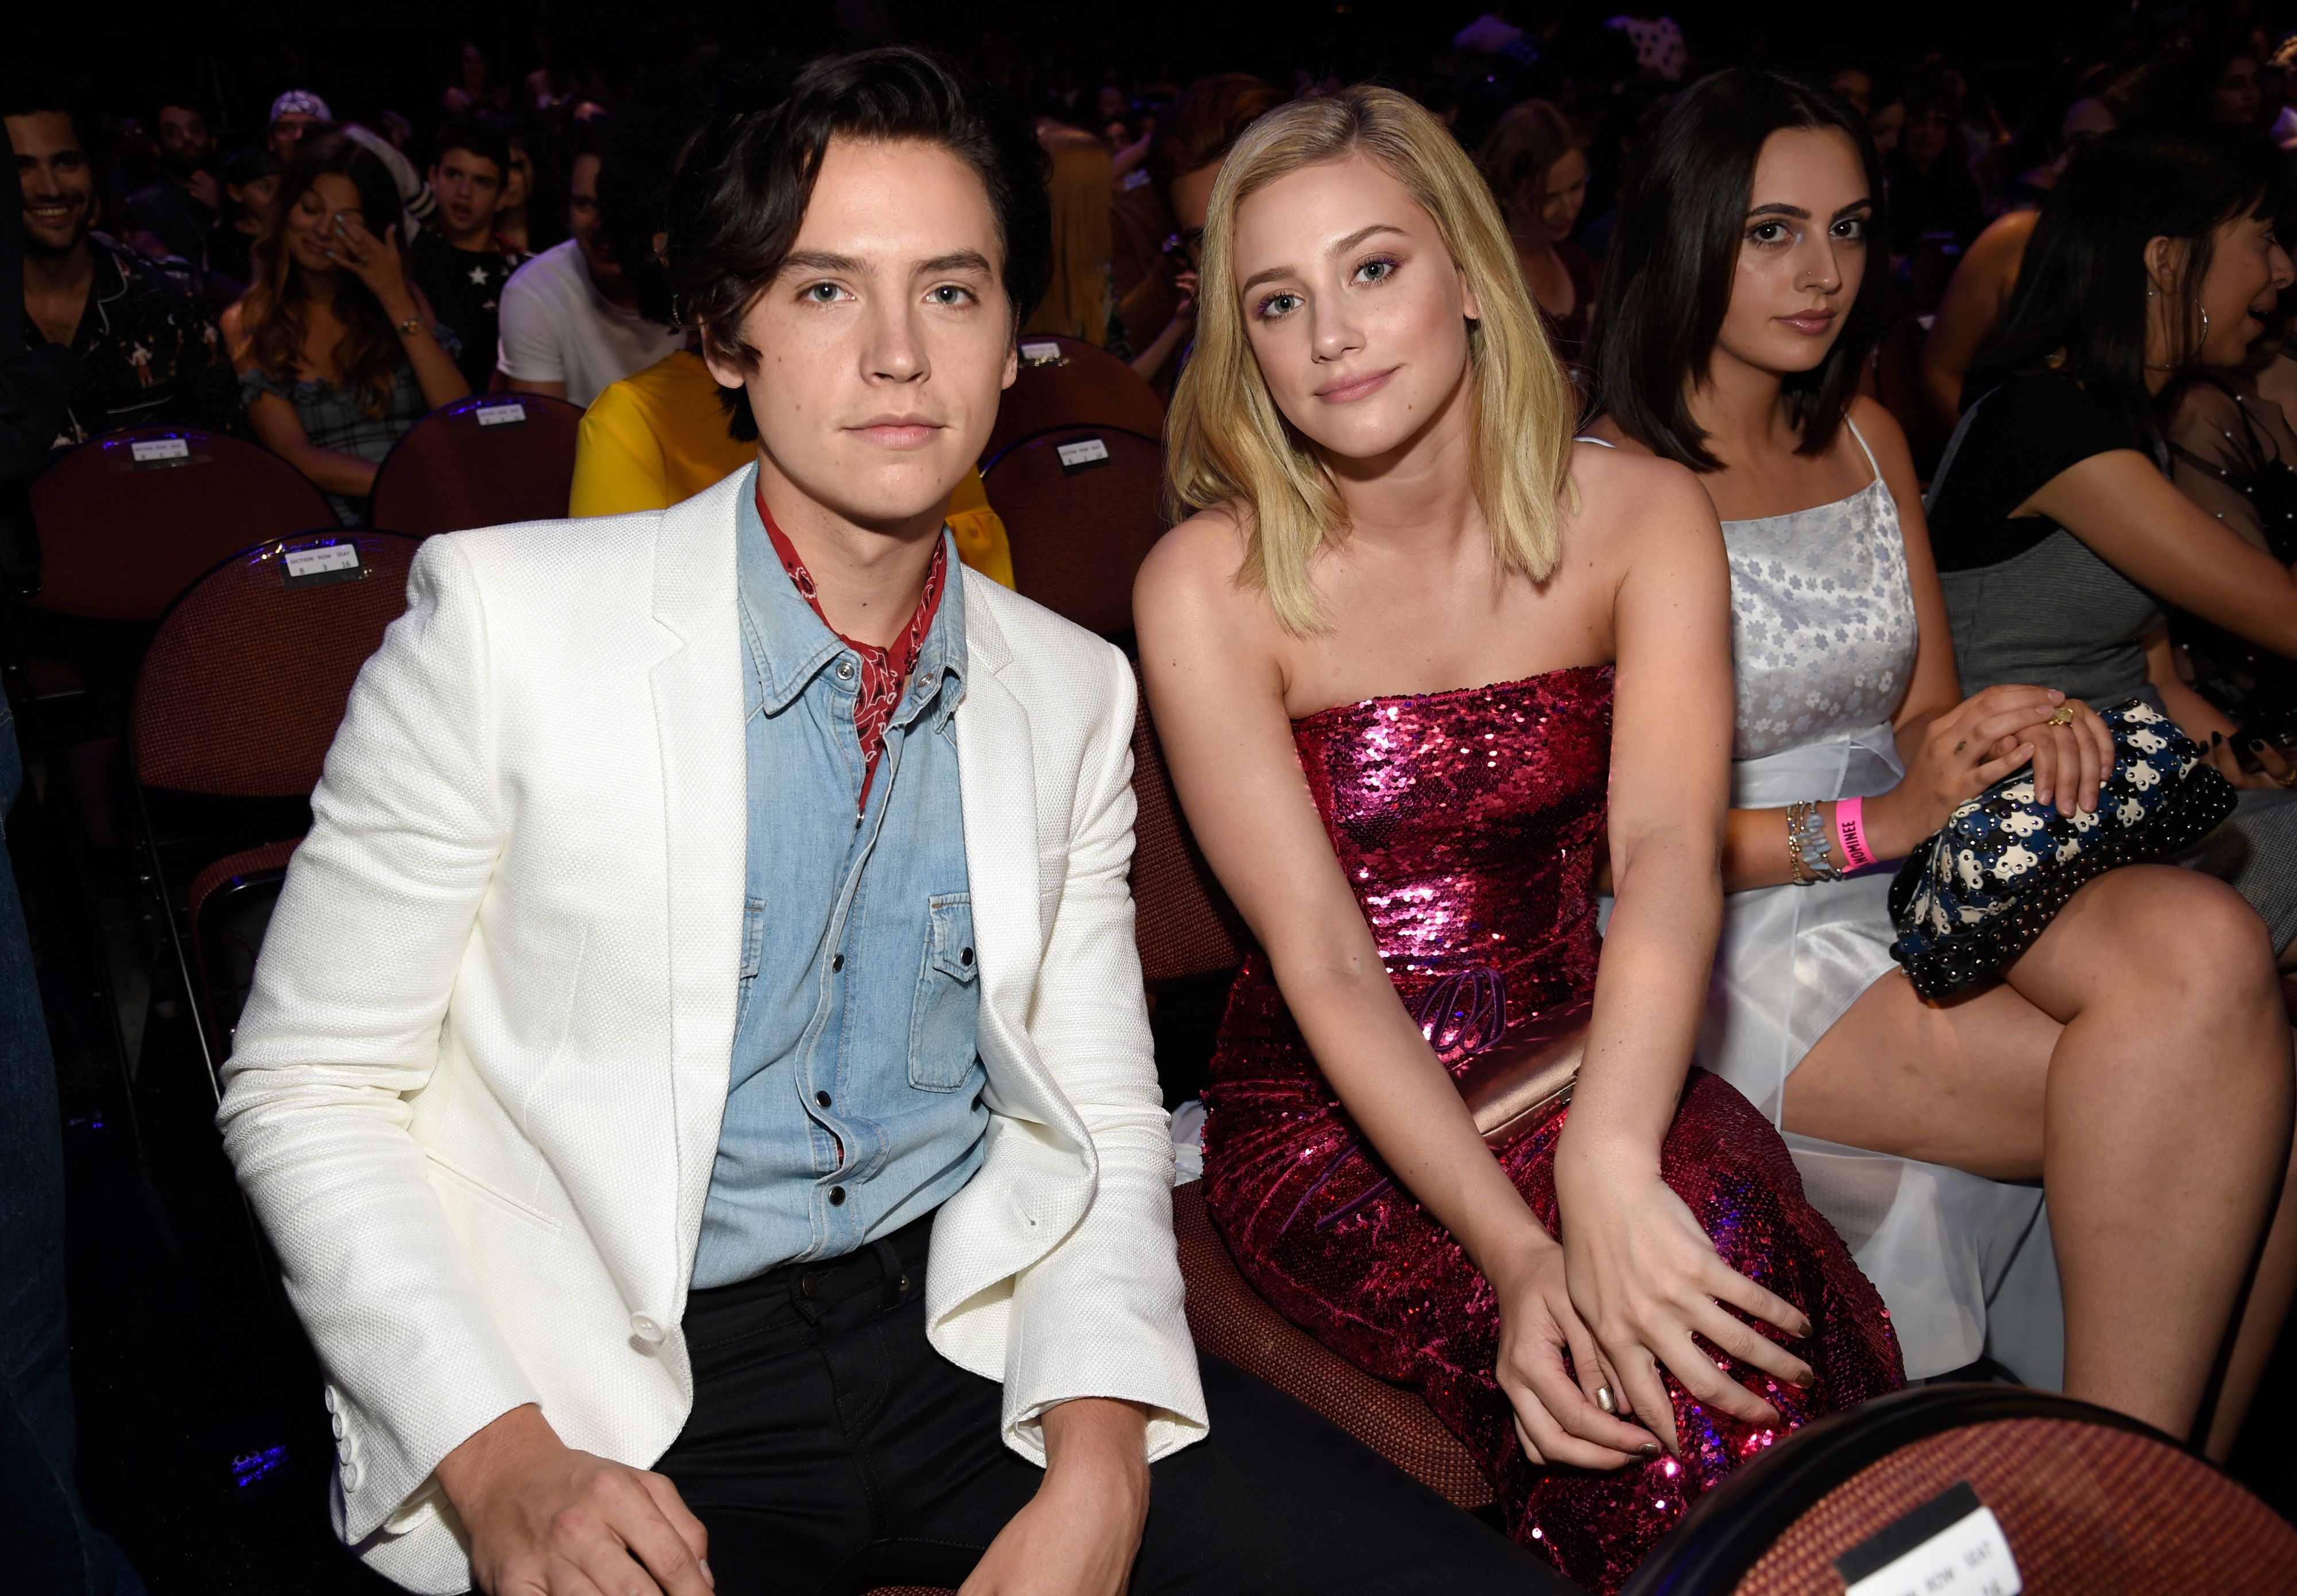 Lili Reinhart and Cole Sprouse Comment on Breakup on Instagram